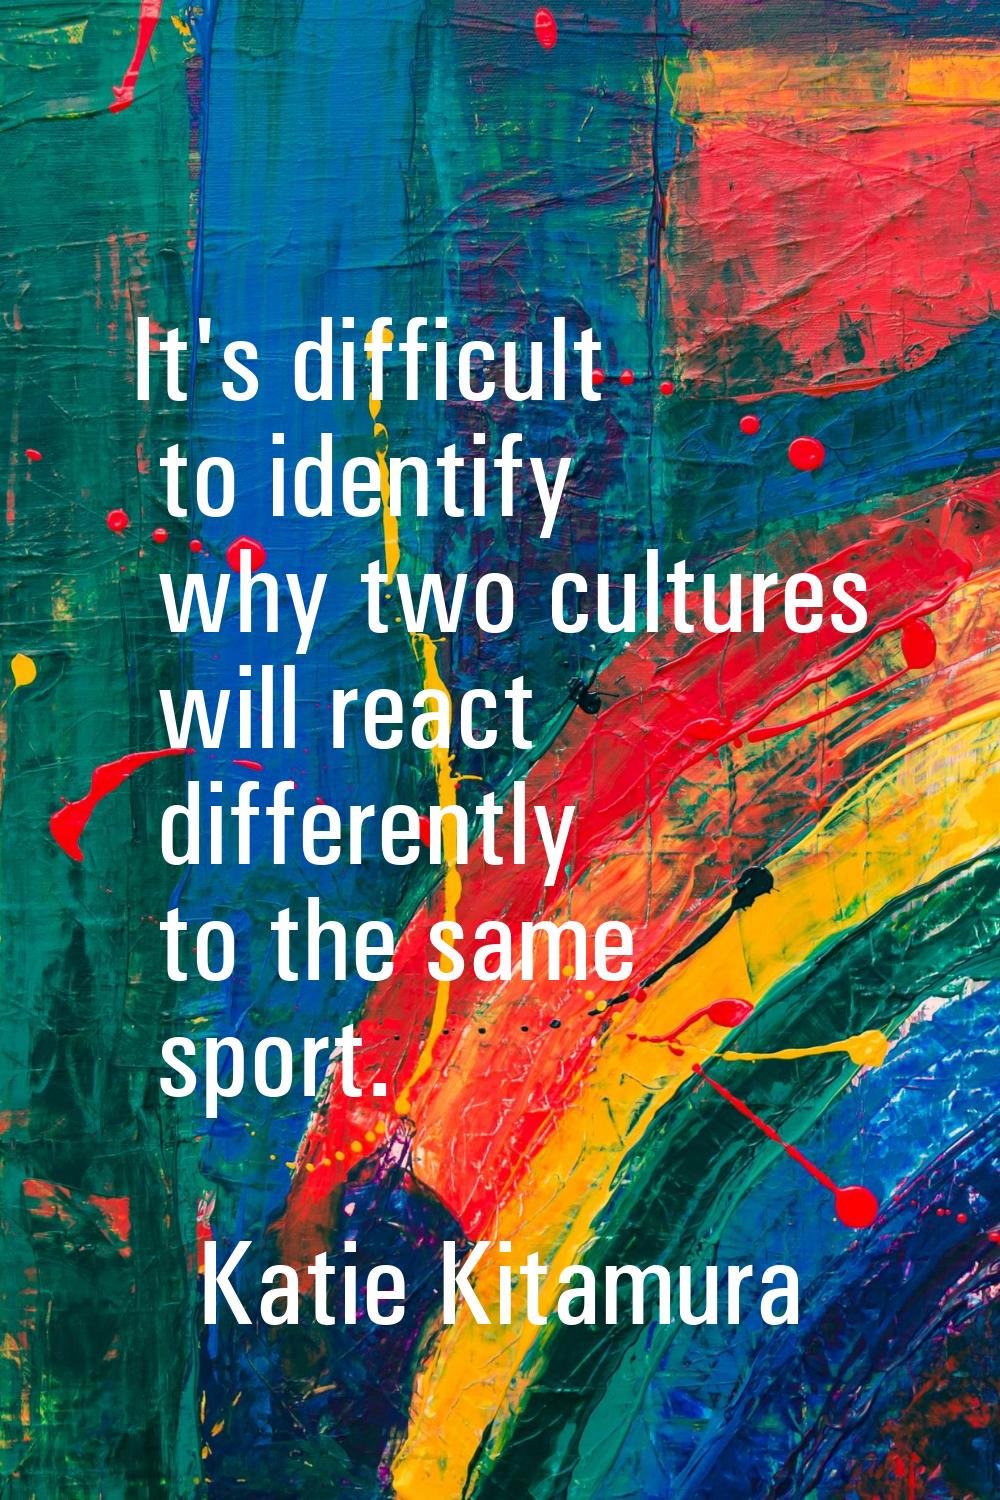 It's difficult to identify why two cultures will react differently to the same sport.